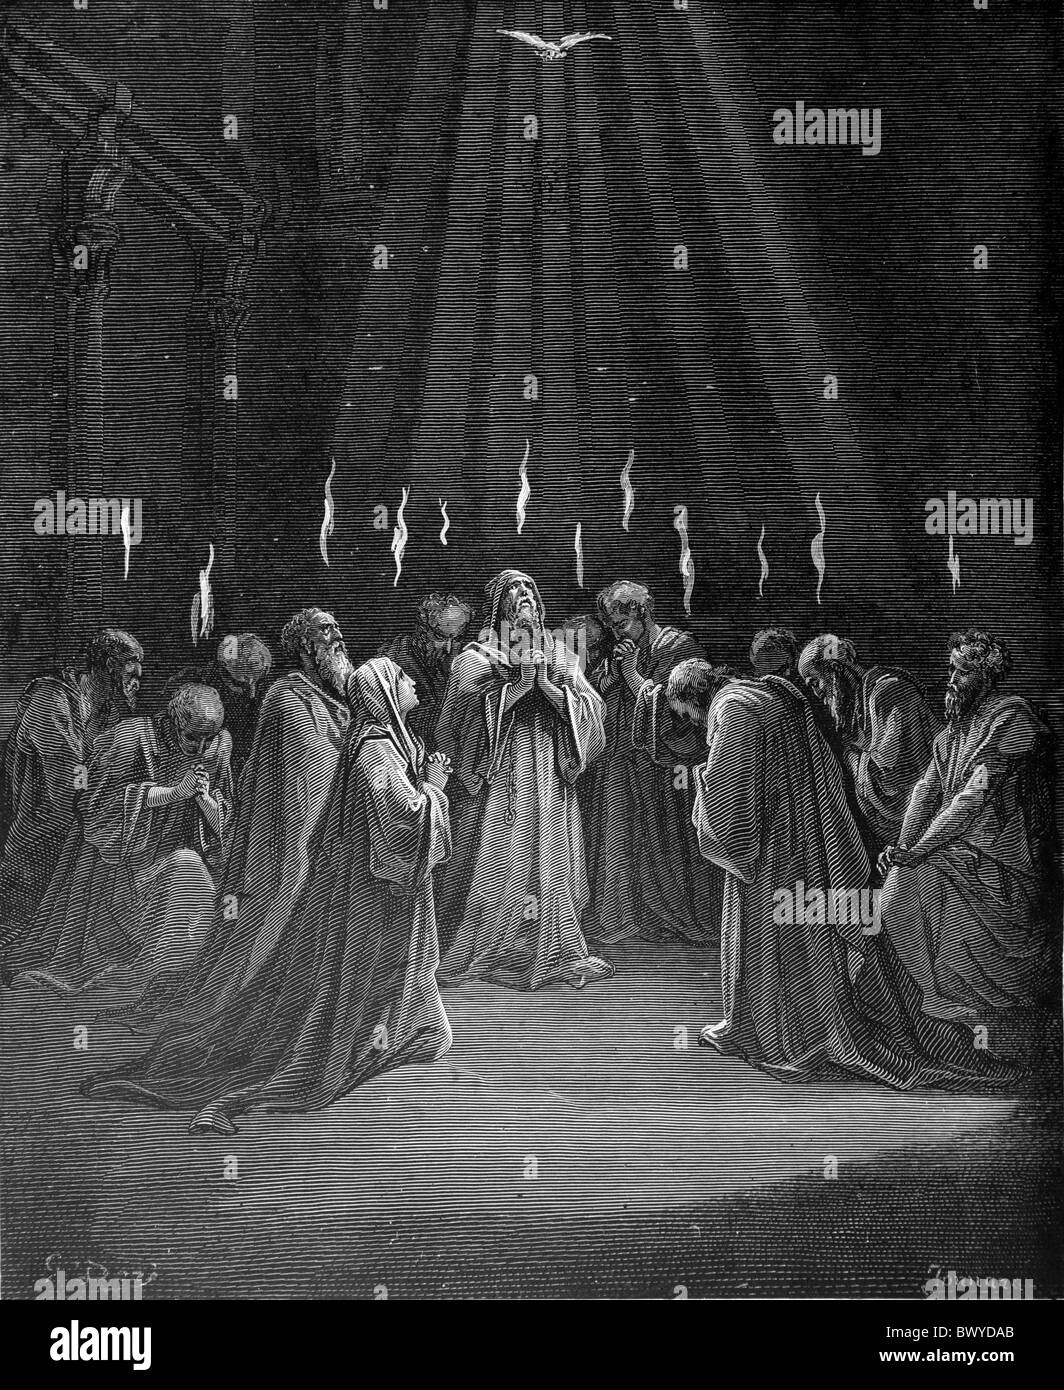 Gustave Doré; The Descent of the Holy Spirit on the Apostles; Black and White Engraving Stock Photo